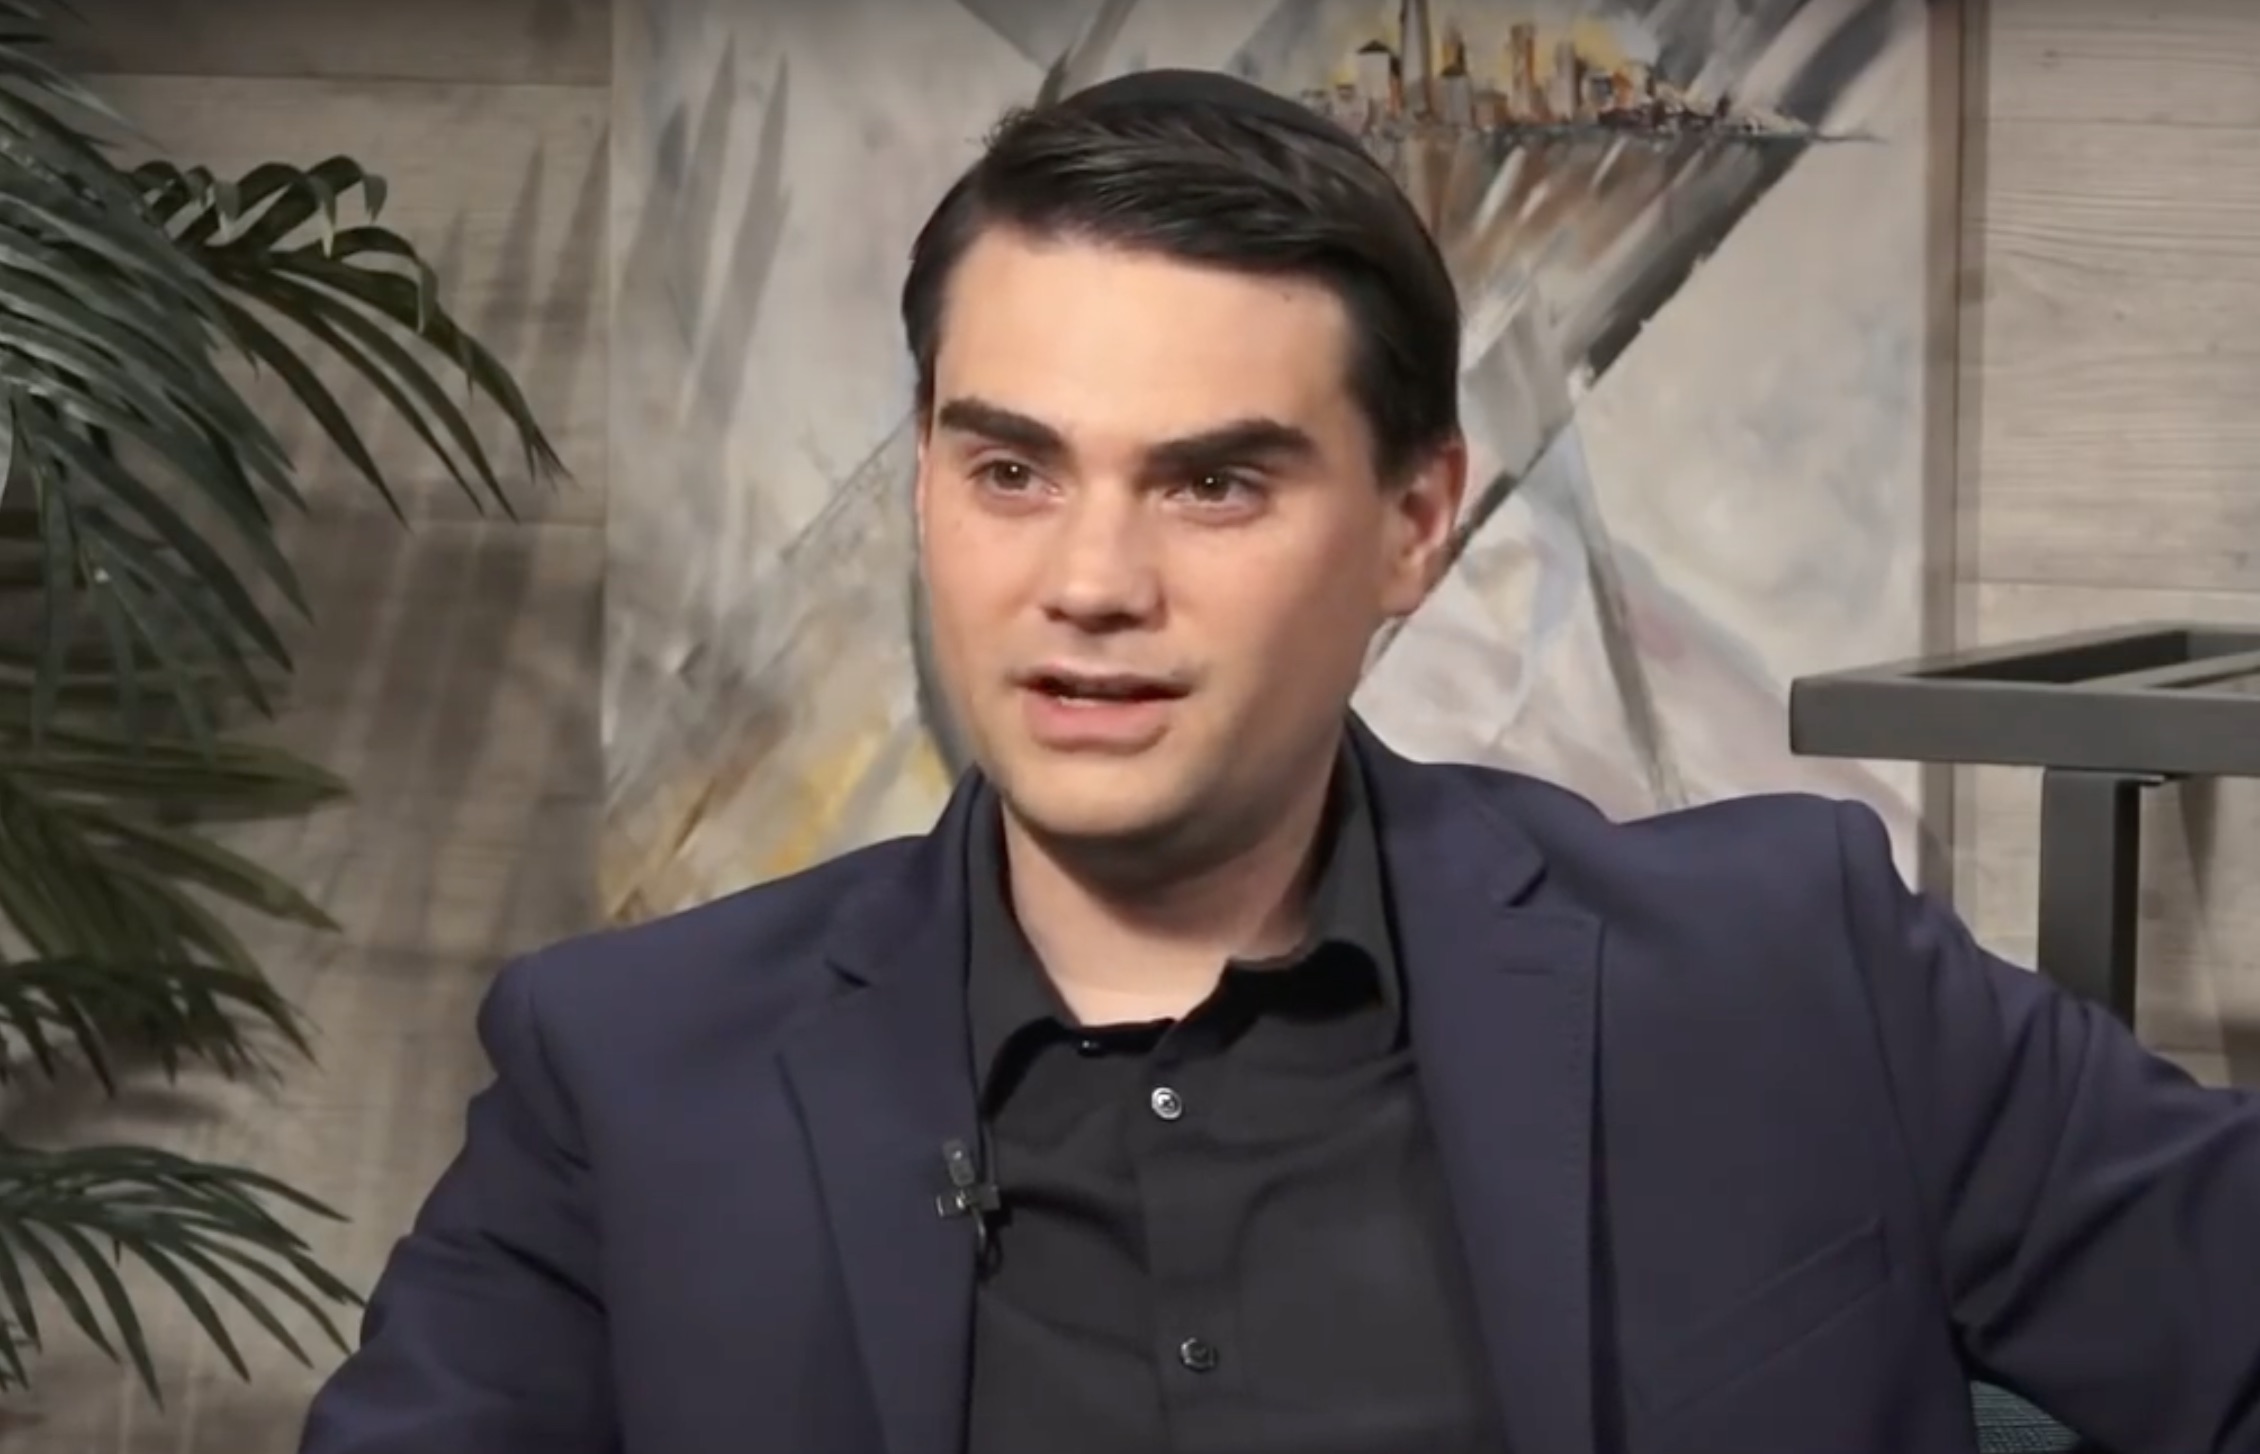 Ben Shapiro Compiles List of ‘All The Dumb Stuff’ He Has Said in The